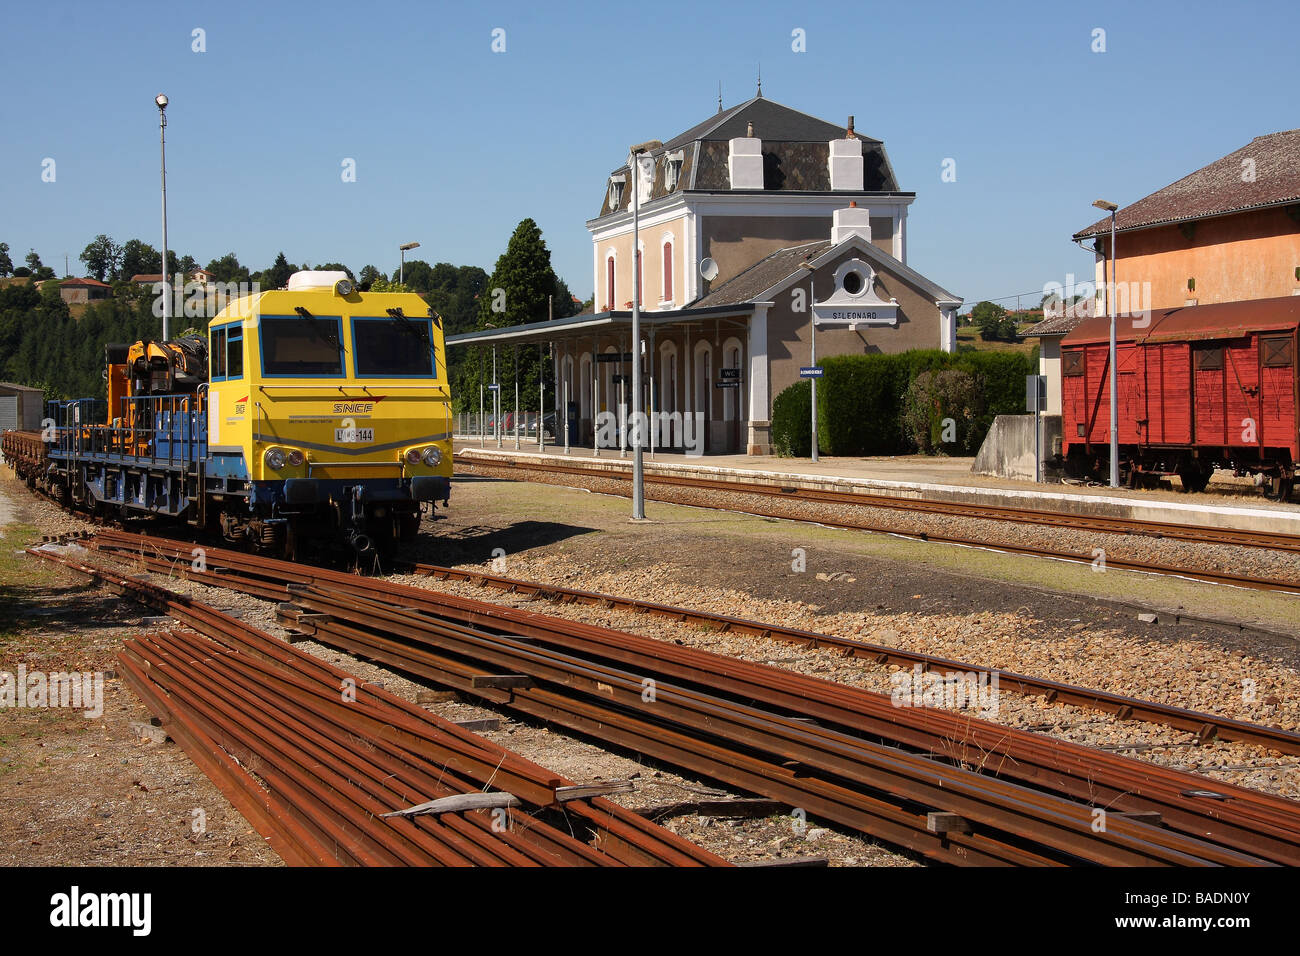 A blue and yellow SNCF track maintenance train in a siding Stock Photo